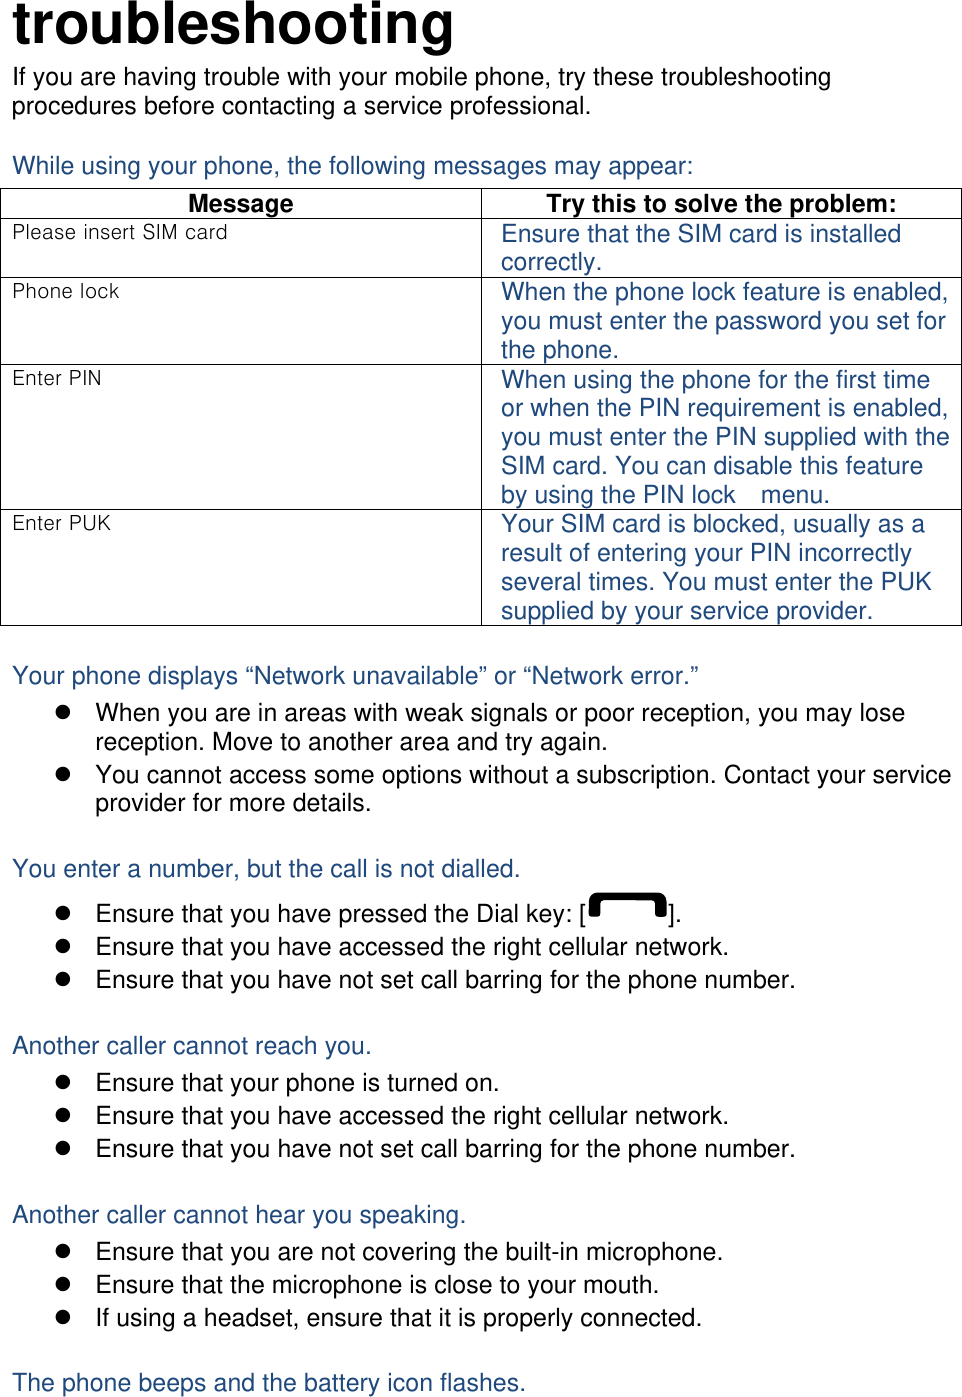 troubleshooting If you are having trouble with your mobile phone, try these troubleshooting procedures before contacting a service professional. While using your phone, the following messages may appear: Message  Try this to solve the problem: P     Ensure that the SIM card is installed correctly. P   When the phone lock feature is enabled, you must enter the password you set for the phone.  P  When using the phone for the first time or when the PIN requirement is enabled, you must enter the PIN supplied with the SIM card. You can disable this feature by using the PIN lock    menu.  PK  Your SIM card is blocked, usually as a result of entering your PIN incorrectly several times. You must enter the PUK supplied by your service provider.    Your phone displays “Network unavailable” or “Network error.”   When you are in areas with weak signals or poor reception, you may lose reception. Move to another area and try again.   You cannot access some options without a subscription. Contact your service provider for more details.  You enter a number, but the call is not dialled.   Ensure that you have pressed the Dial key: [ ].   Ensure that you have accessed the right cellular network.   Ensure that you have not set call barring for the phone number.  Another caller cannot reach you.   Ensure that your phone is turned on.   Ensure that you have accessed the right cellular network.   Ensure that you have not set call barring for the phone number.  Another caller cannot hear you speaking.   Ensure that you are not covering the built-in microphone.   Ensure that the microphone is close to your mouth.   If using a headset, ensure that it is properly connected.  The phone beeps and the battery icon flashes. 